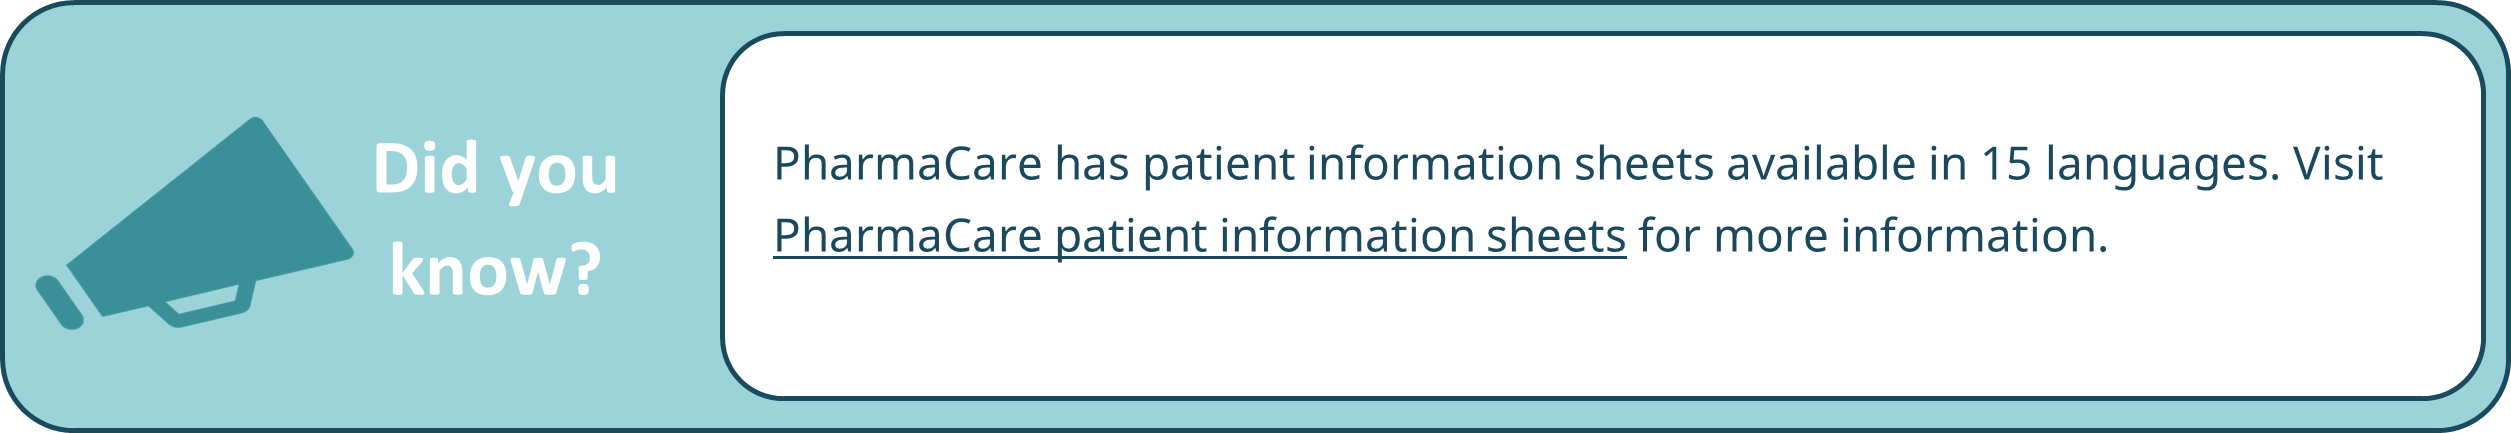 PharmaCare has patient information sheets available in 15 languages. Visit PharmaCare patient information sheets for more information. 